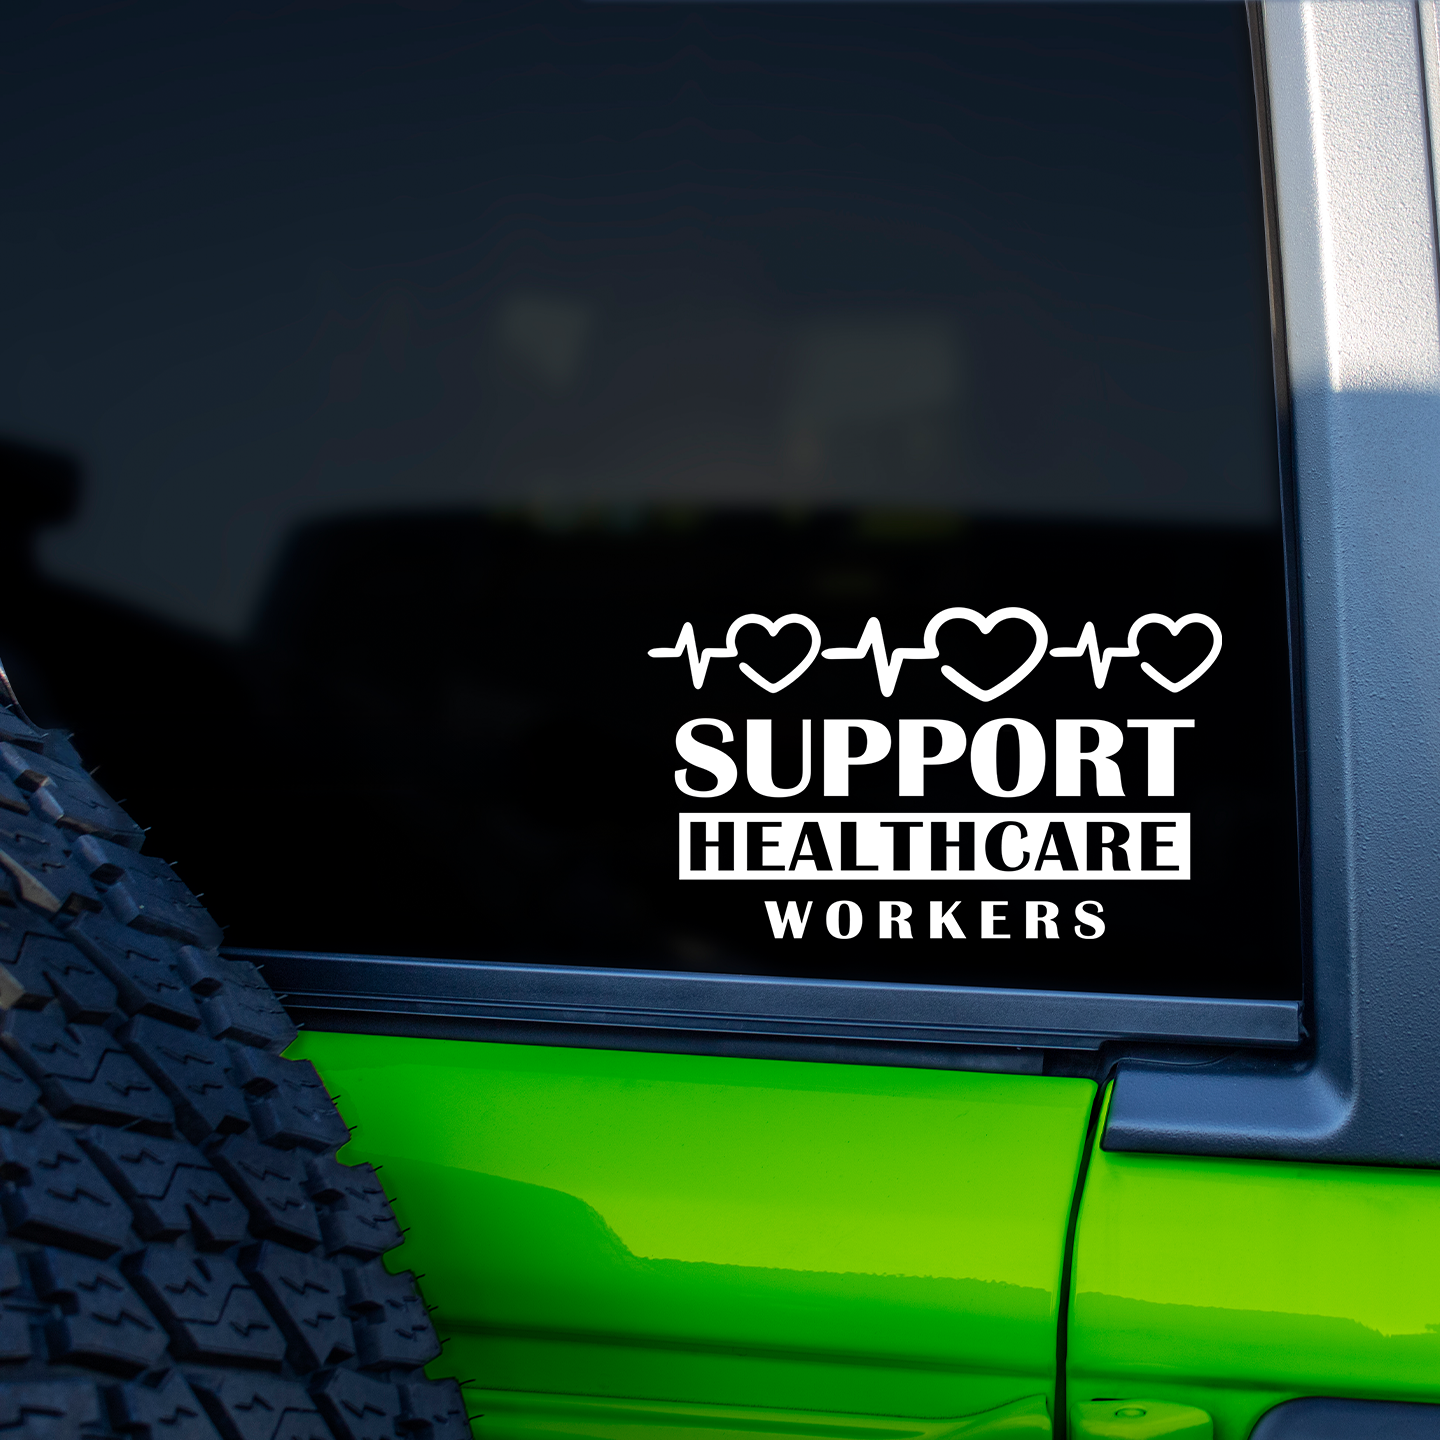 Support Healthcare Workers Sticker